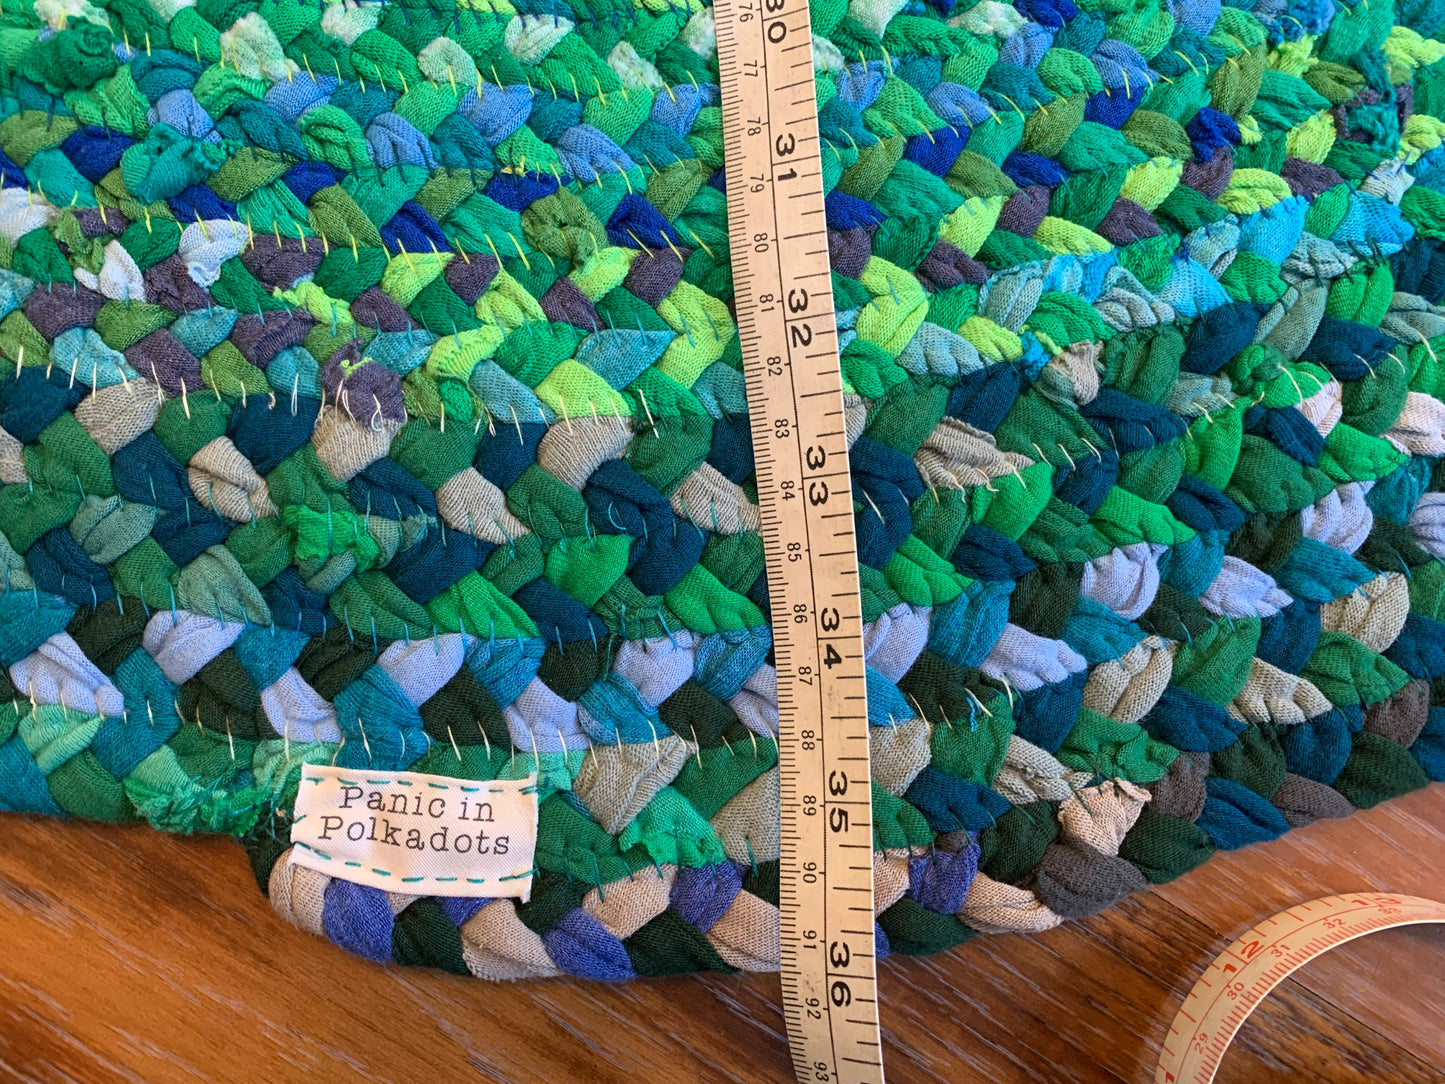 back side of rug, with hand stitching, and a measuring tape closeup, showing 36 inches as the diameter.